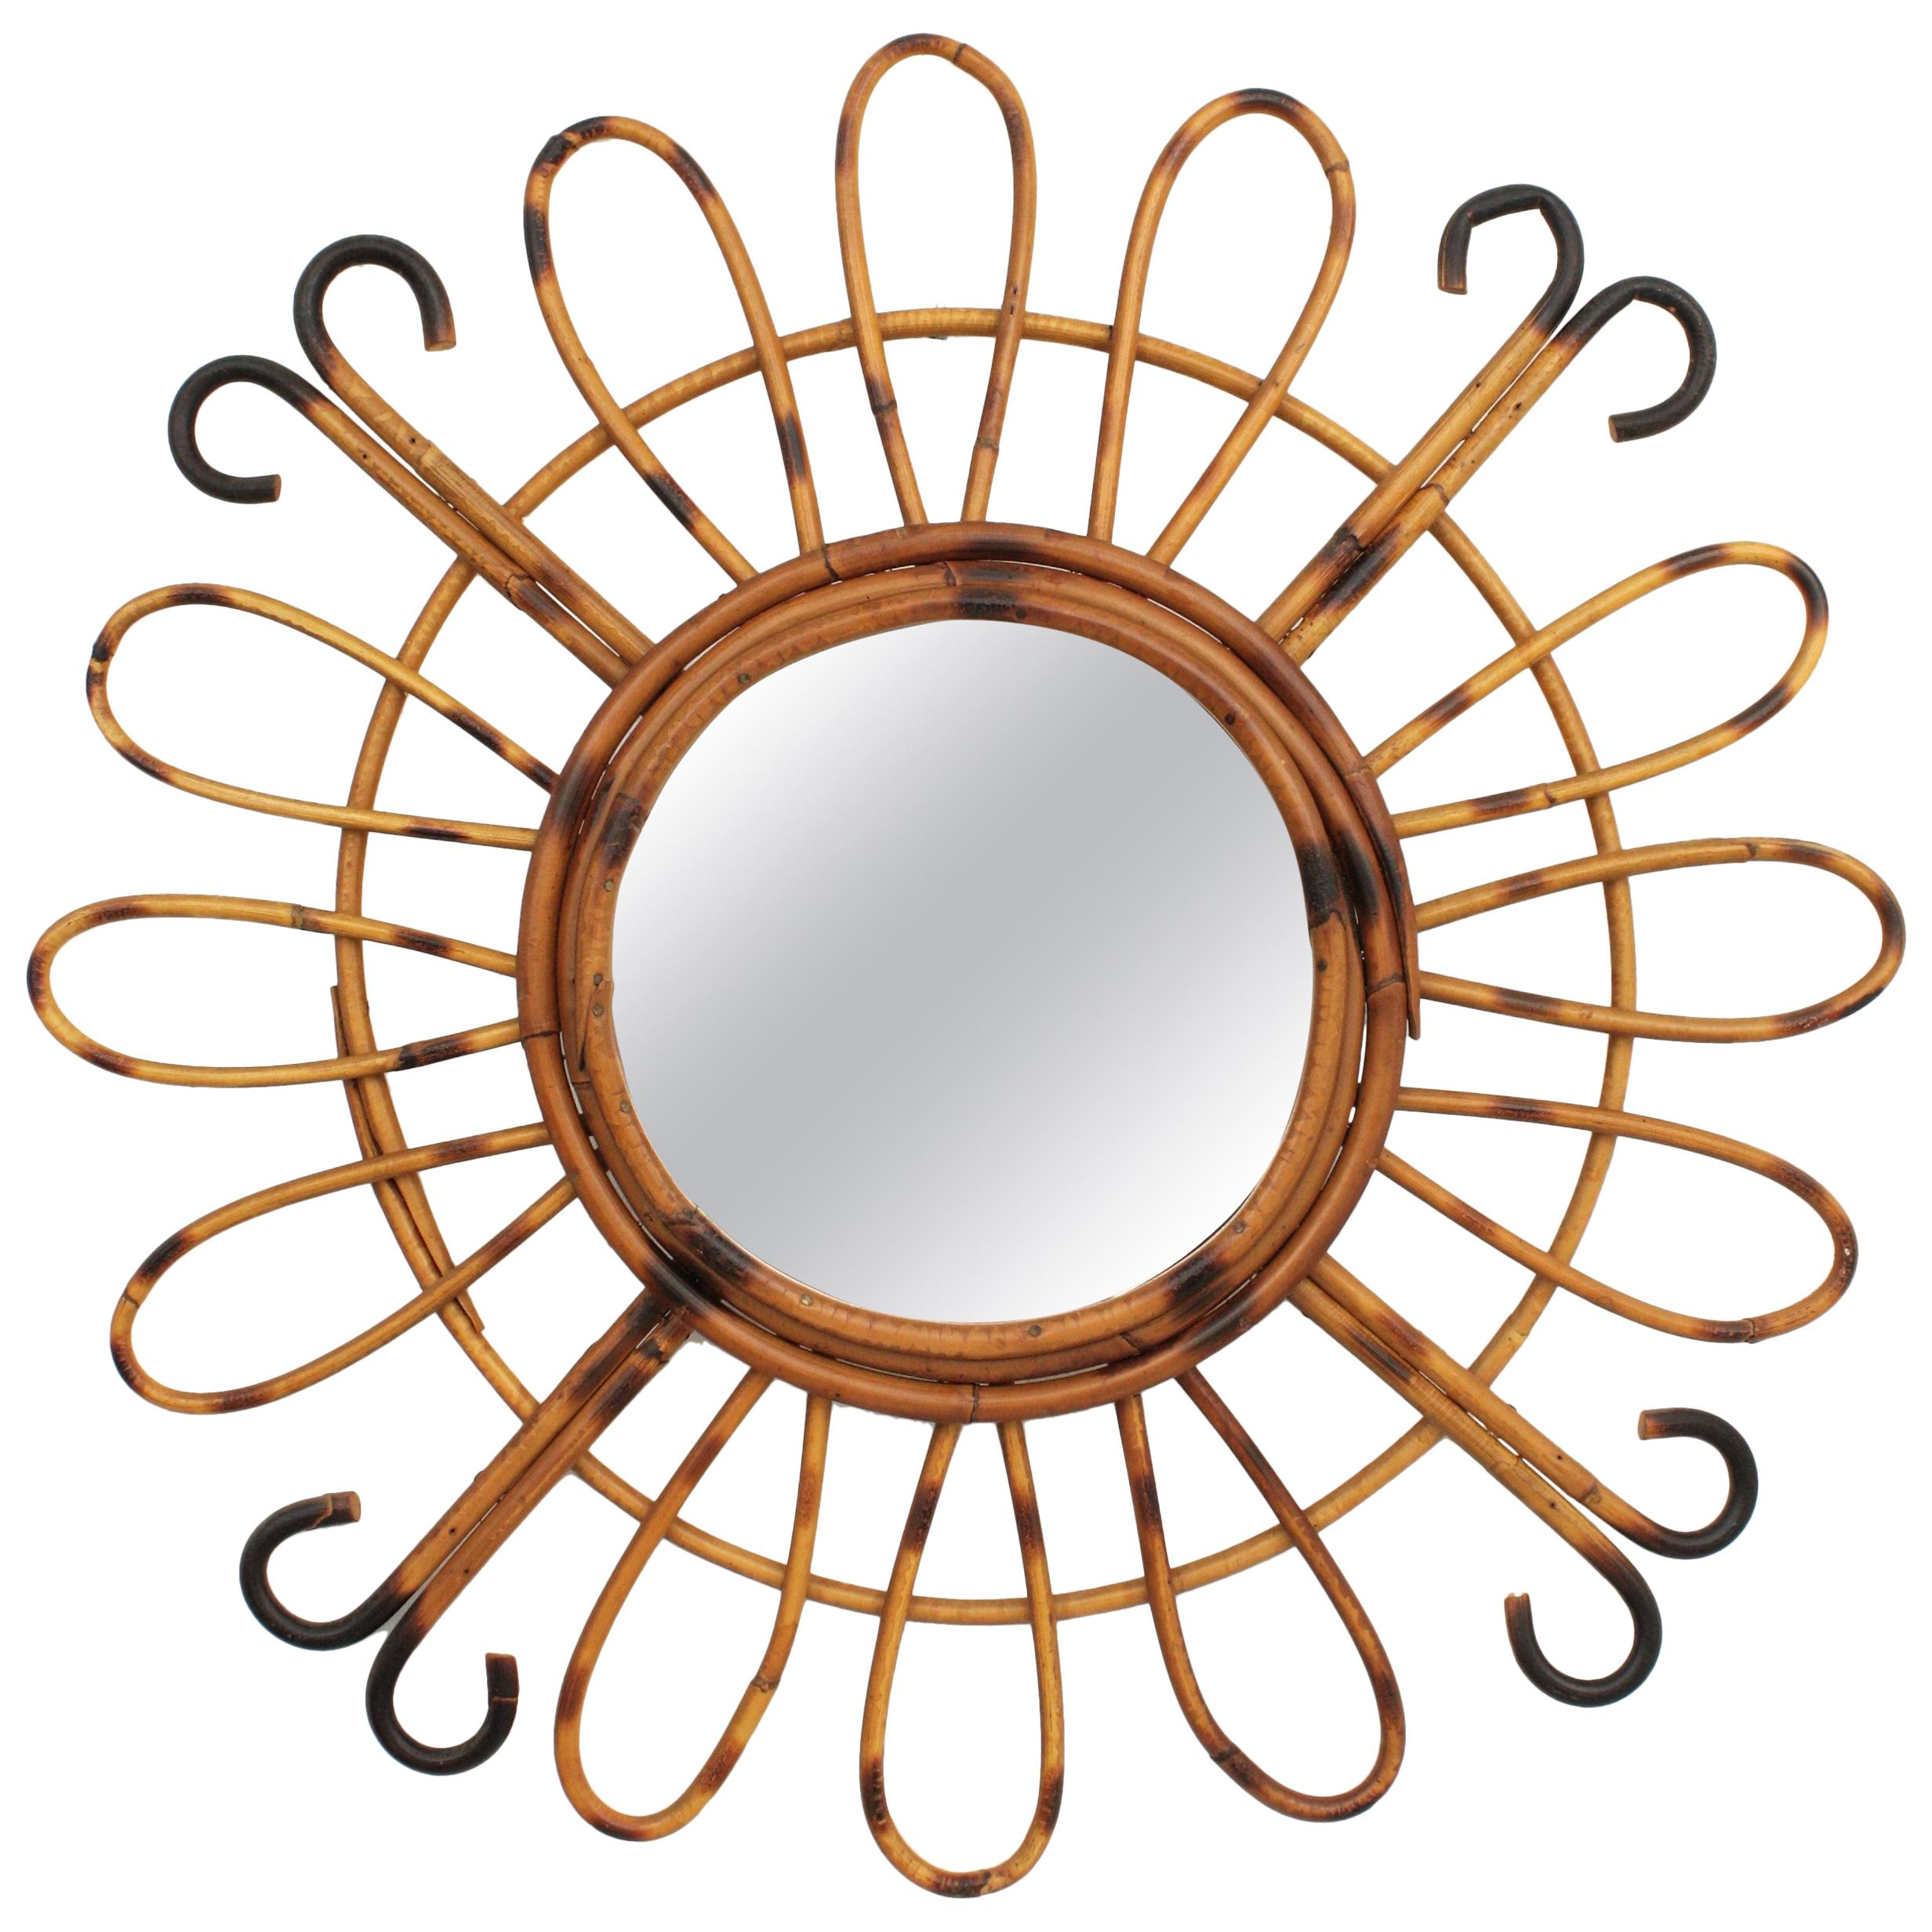 1950s Midcentury French Riviera Handcrafted Rattan and Bamboo Sunburst Mirror